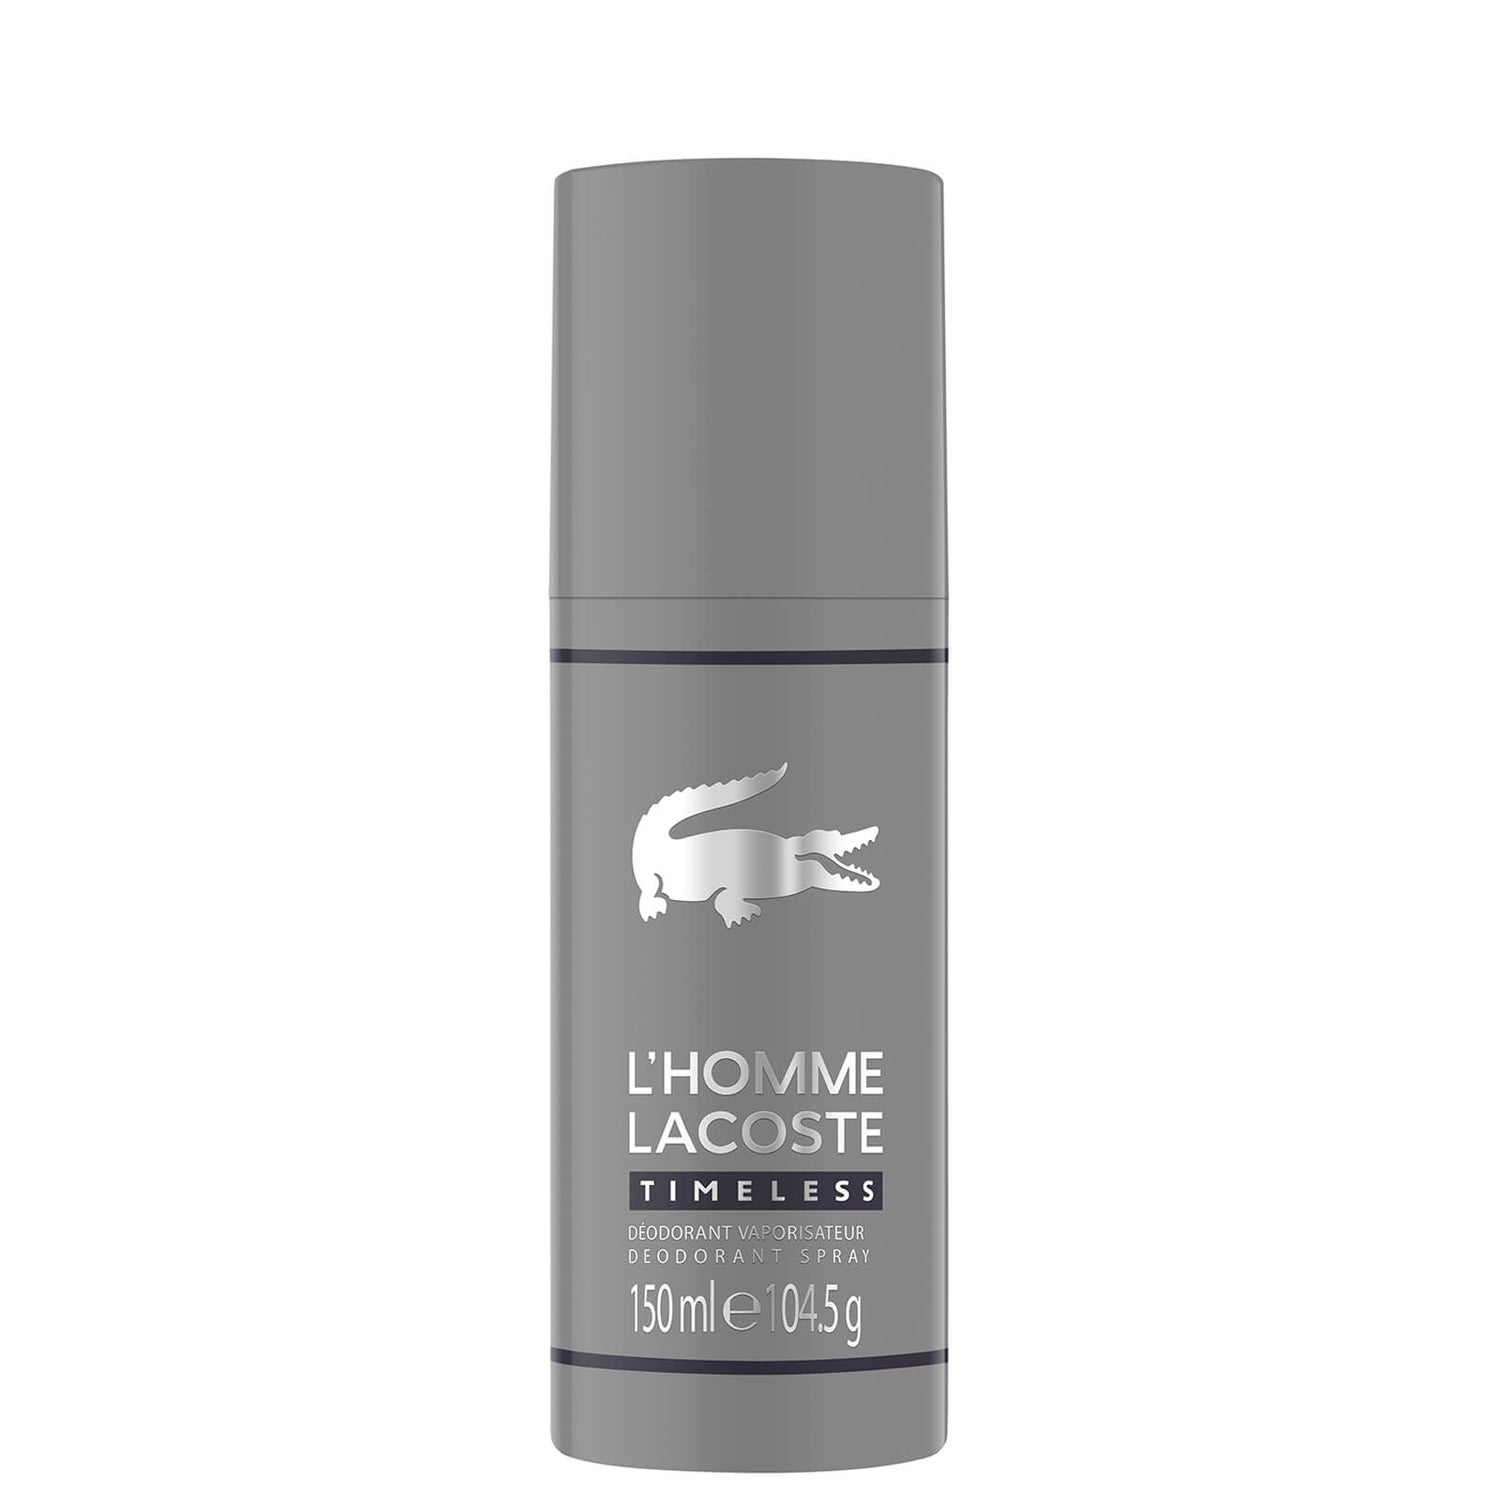 Lacoste L'Homme Lacoste Timeless Deodorant Spray 150ml